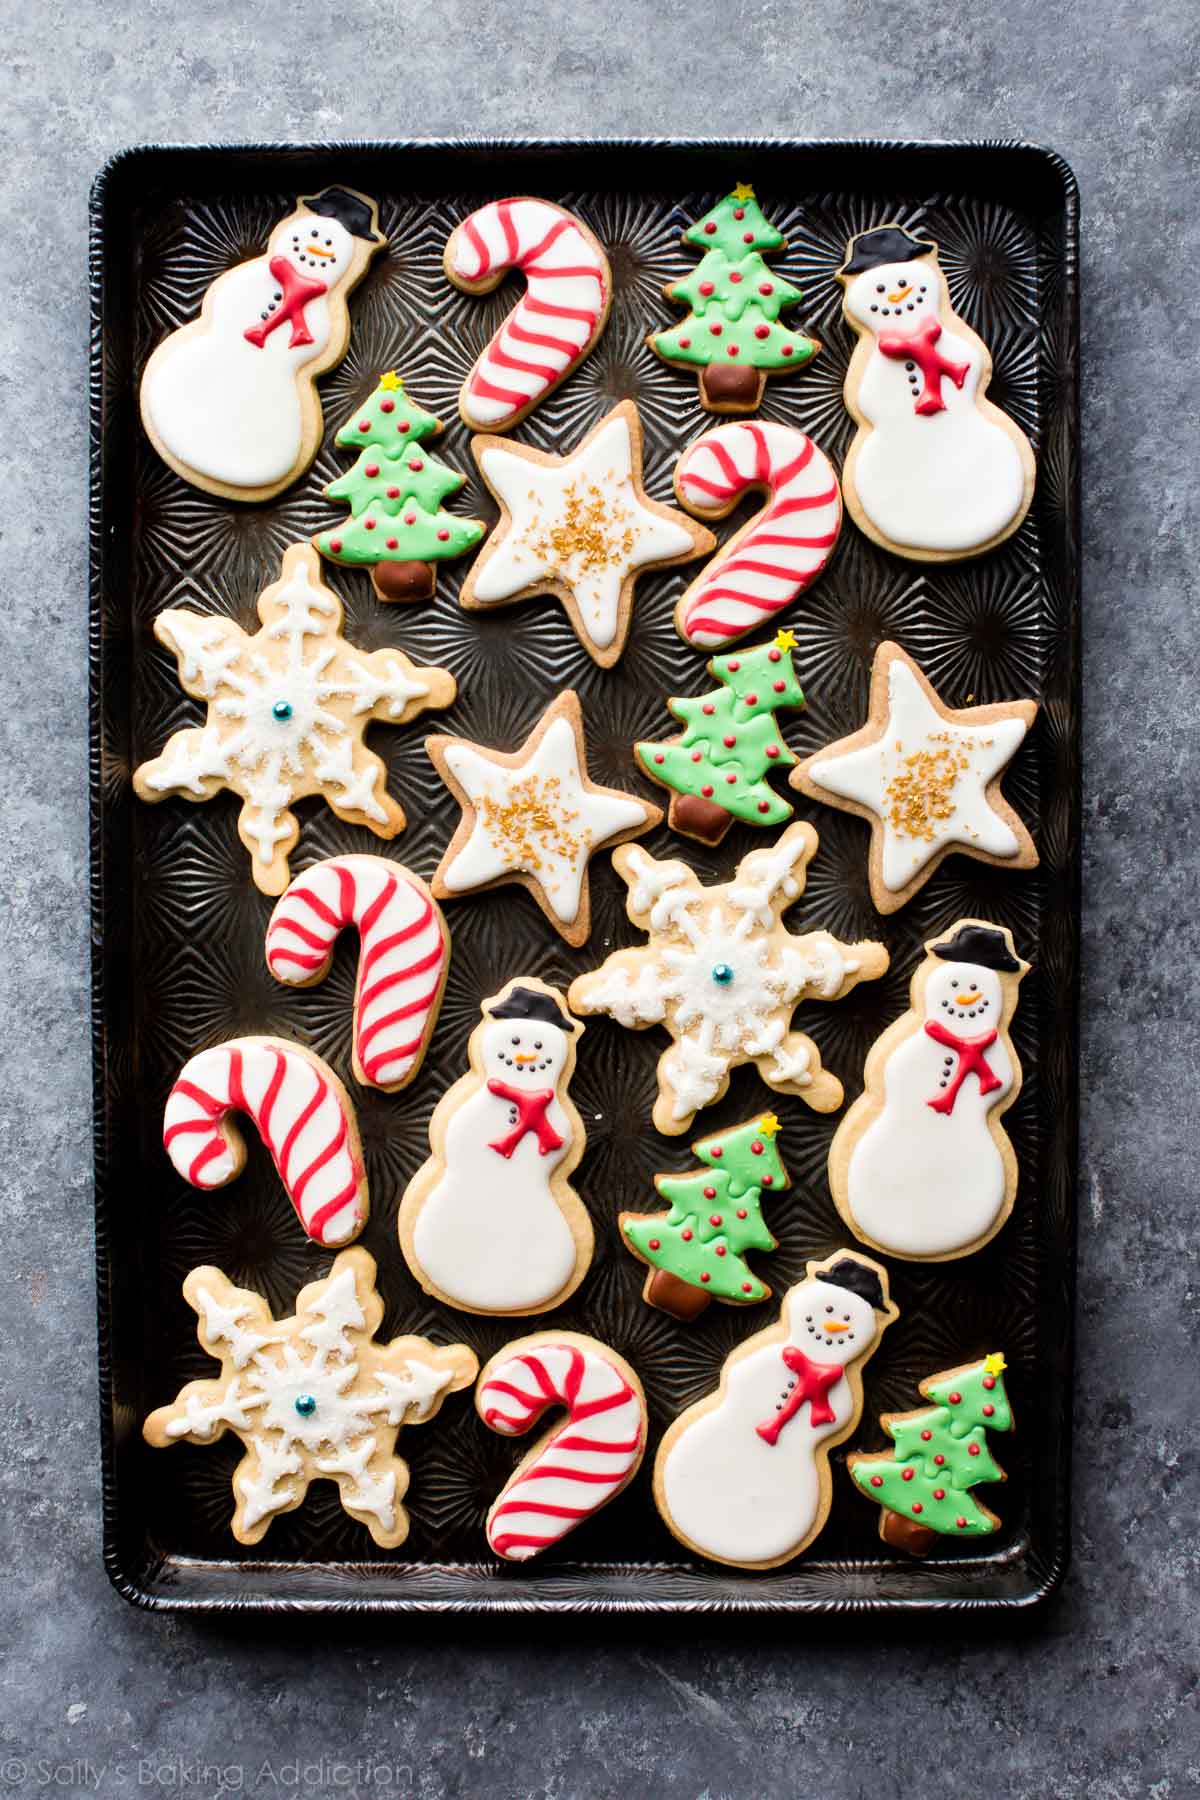 Christmas cookie decorating ideas